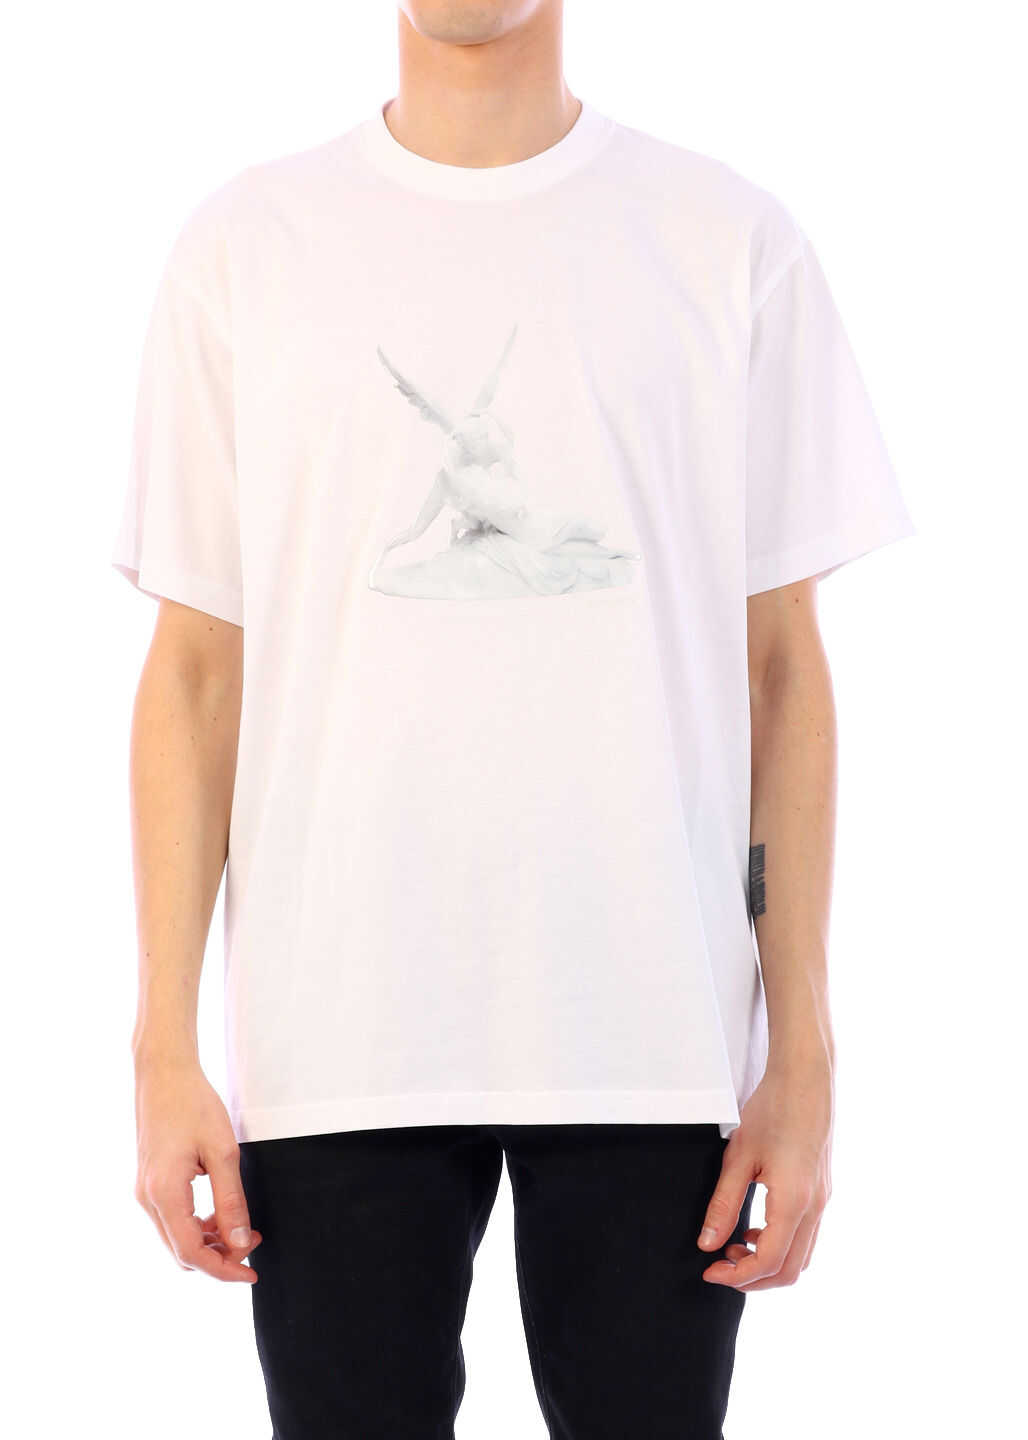 Burberry T-Shirt Amore And Psyche White